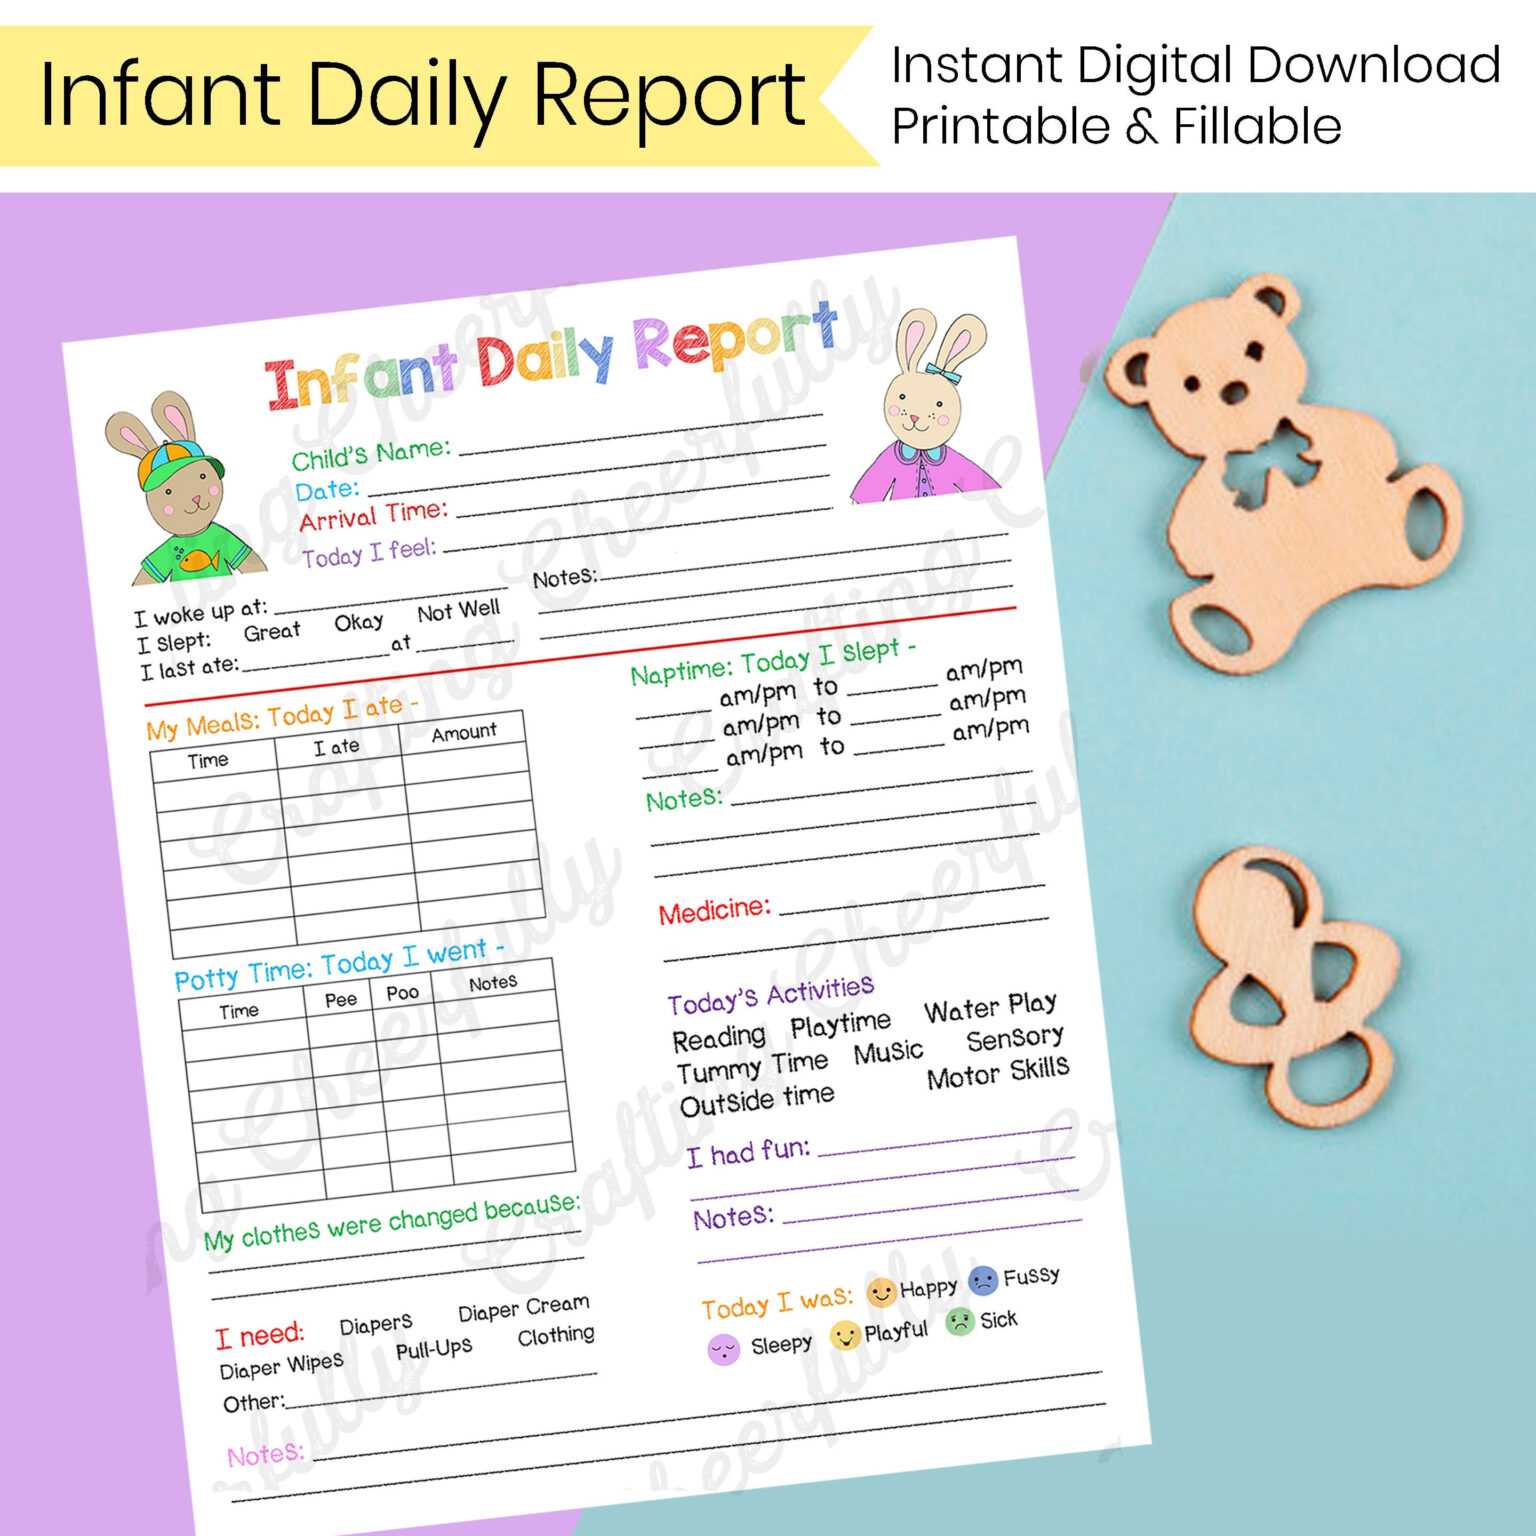 Daycare Infant Daily Report Template Best Creative Templates